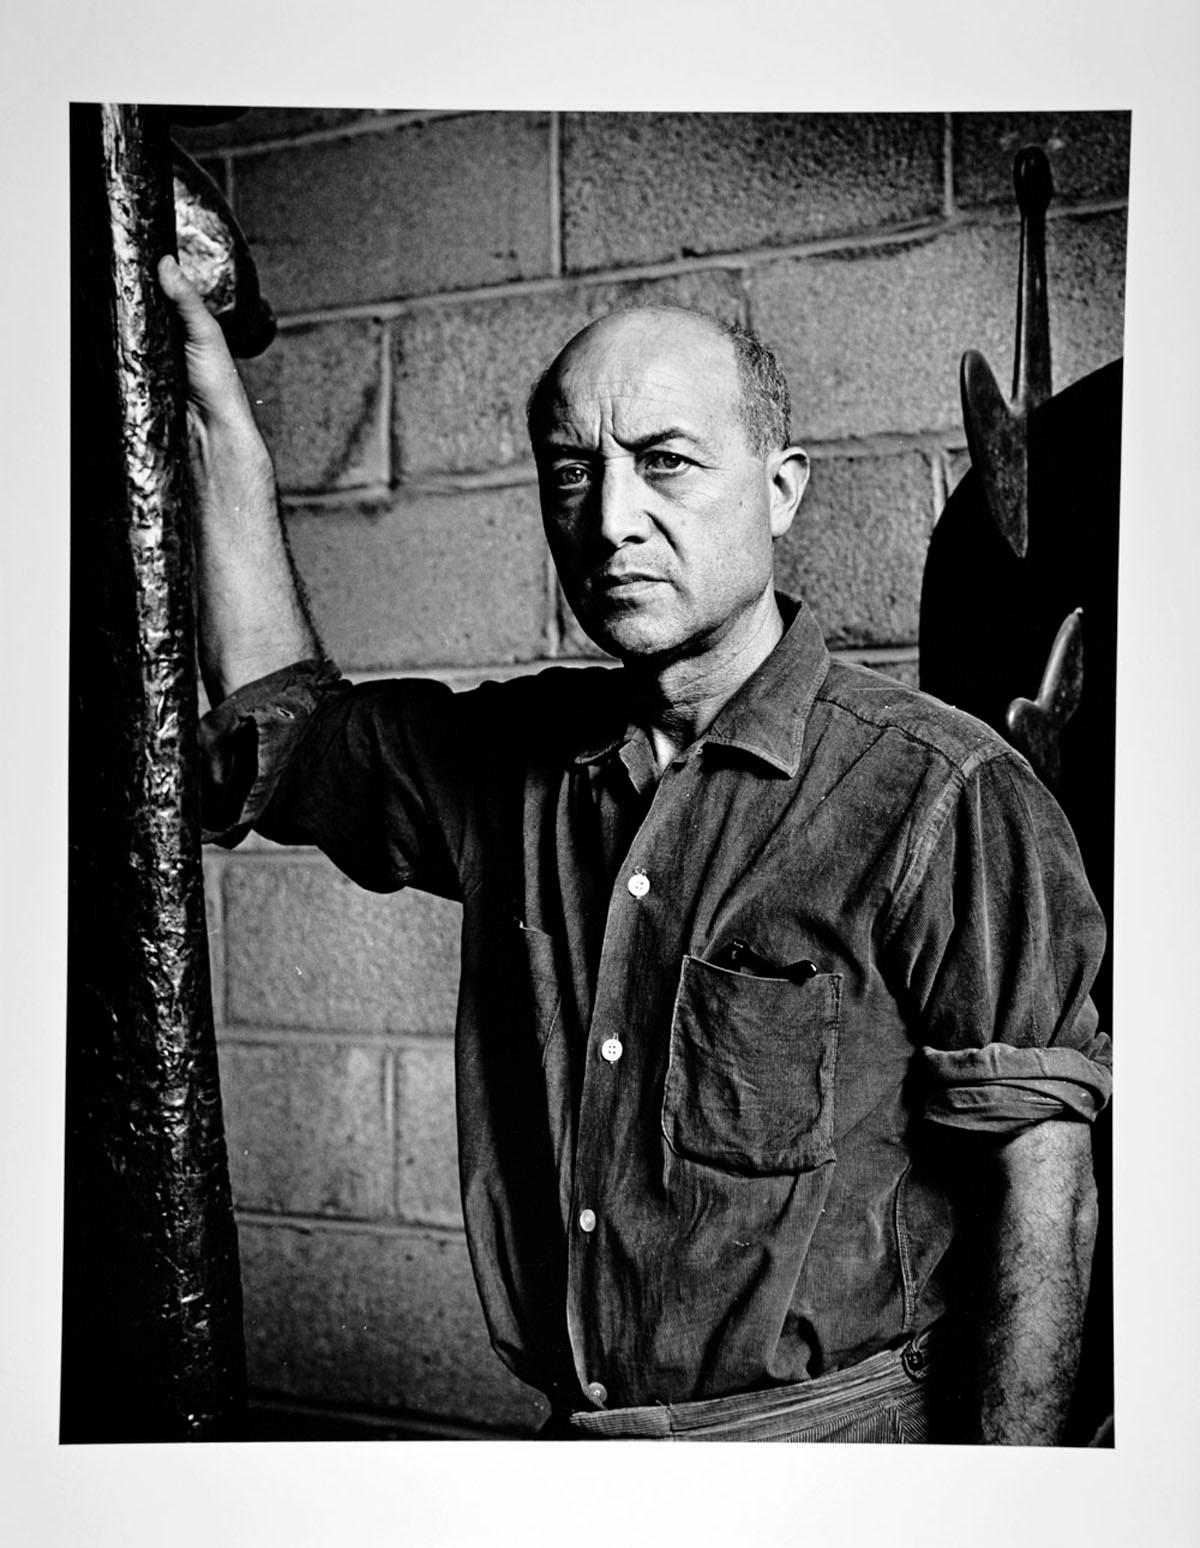 Jack Mitchell Black and White Photograph - Sculptor Isamu Noguchi in his NYC studio